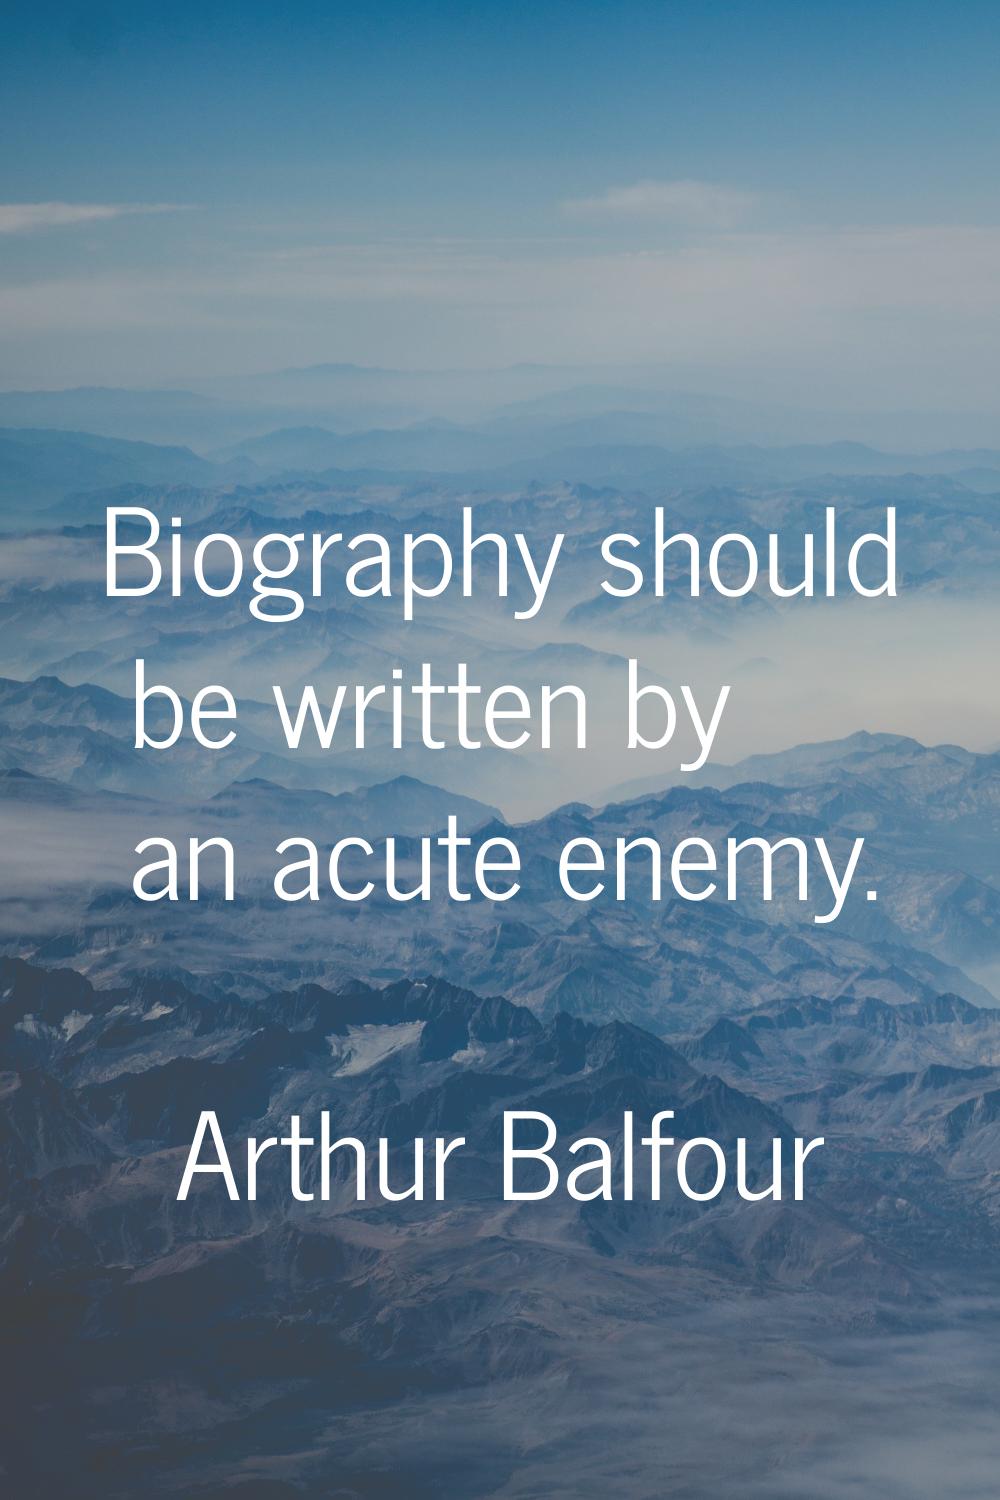 Biography should be written by an acute enemy.